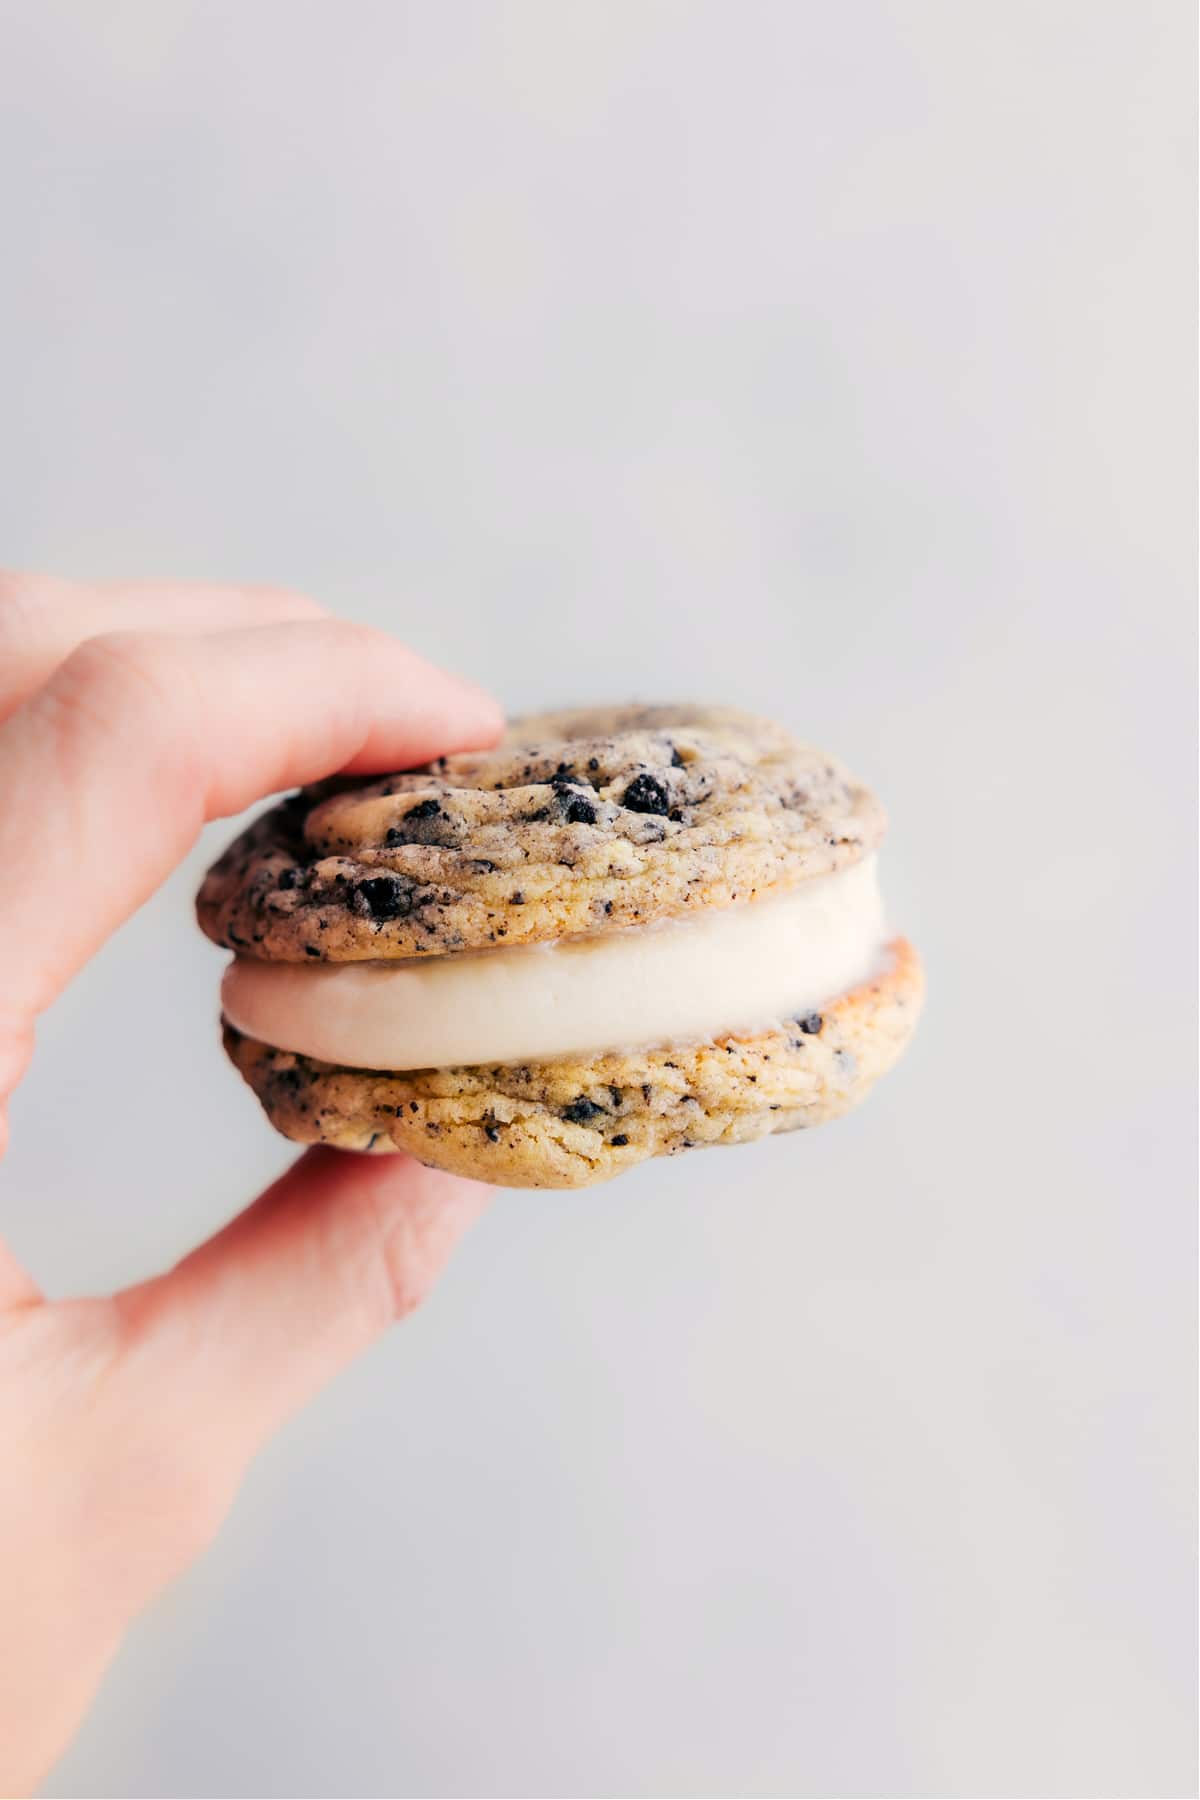 One of the oreo whoopie pies being held up showing the yummy layers.